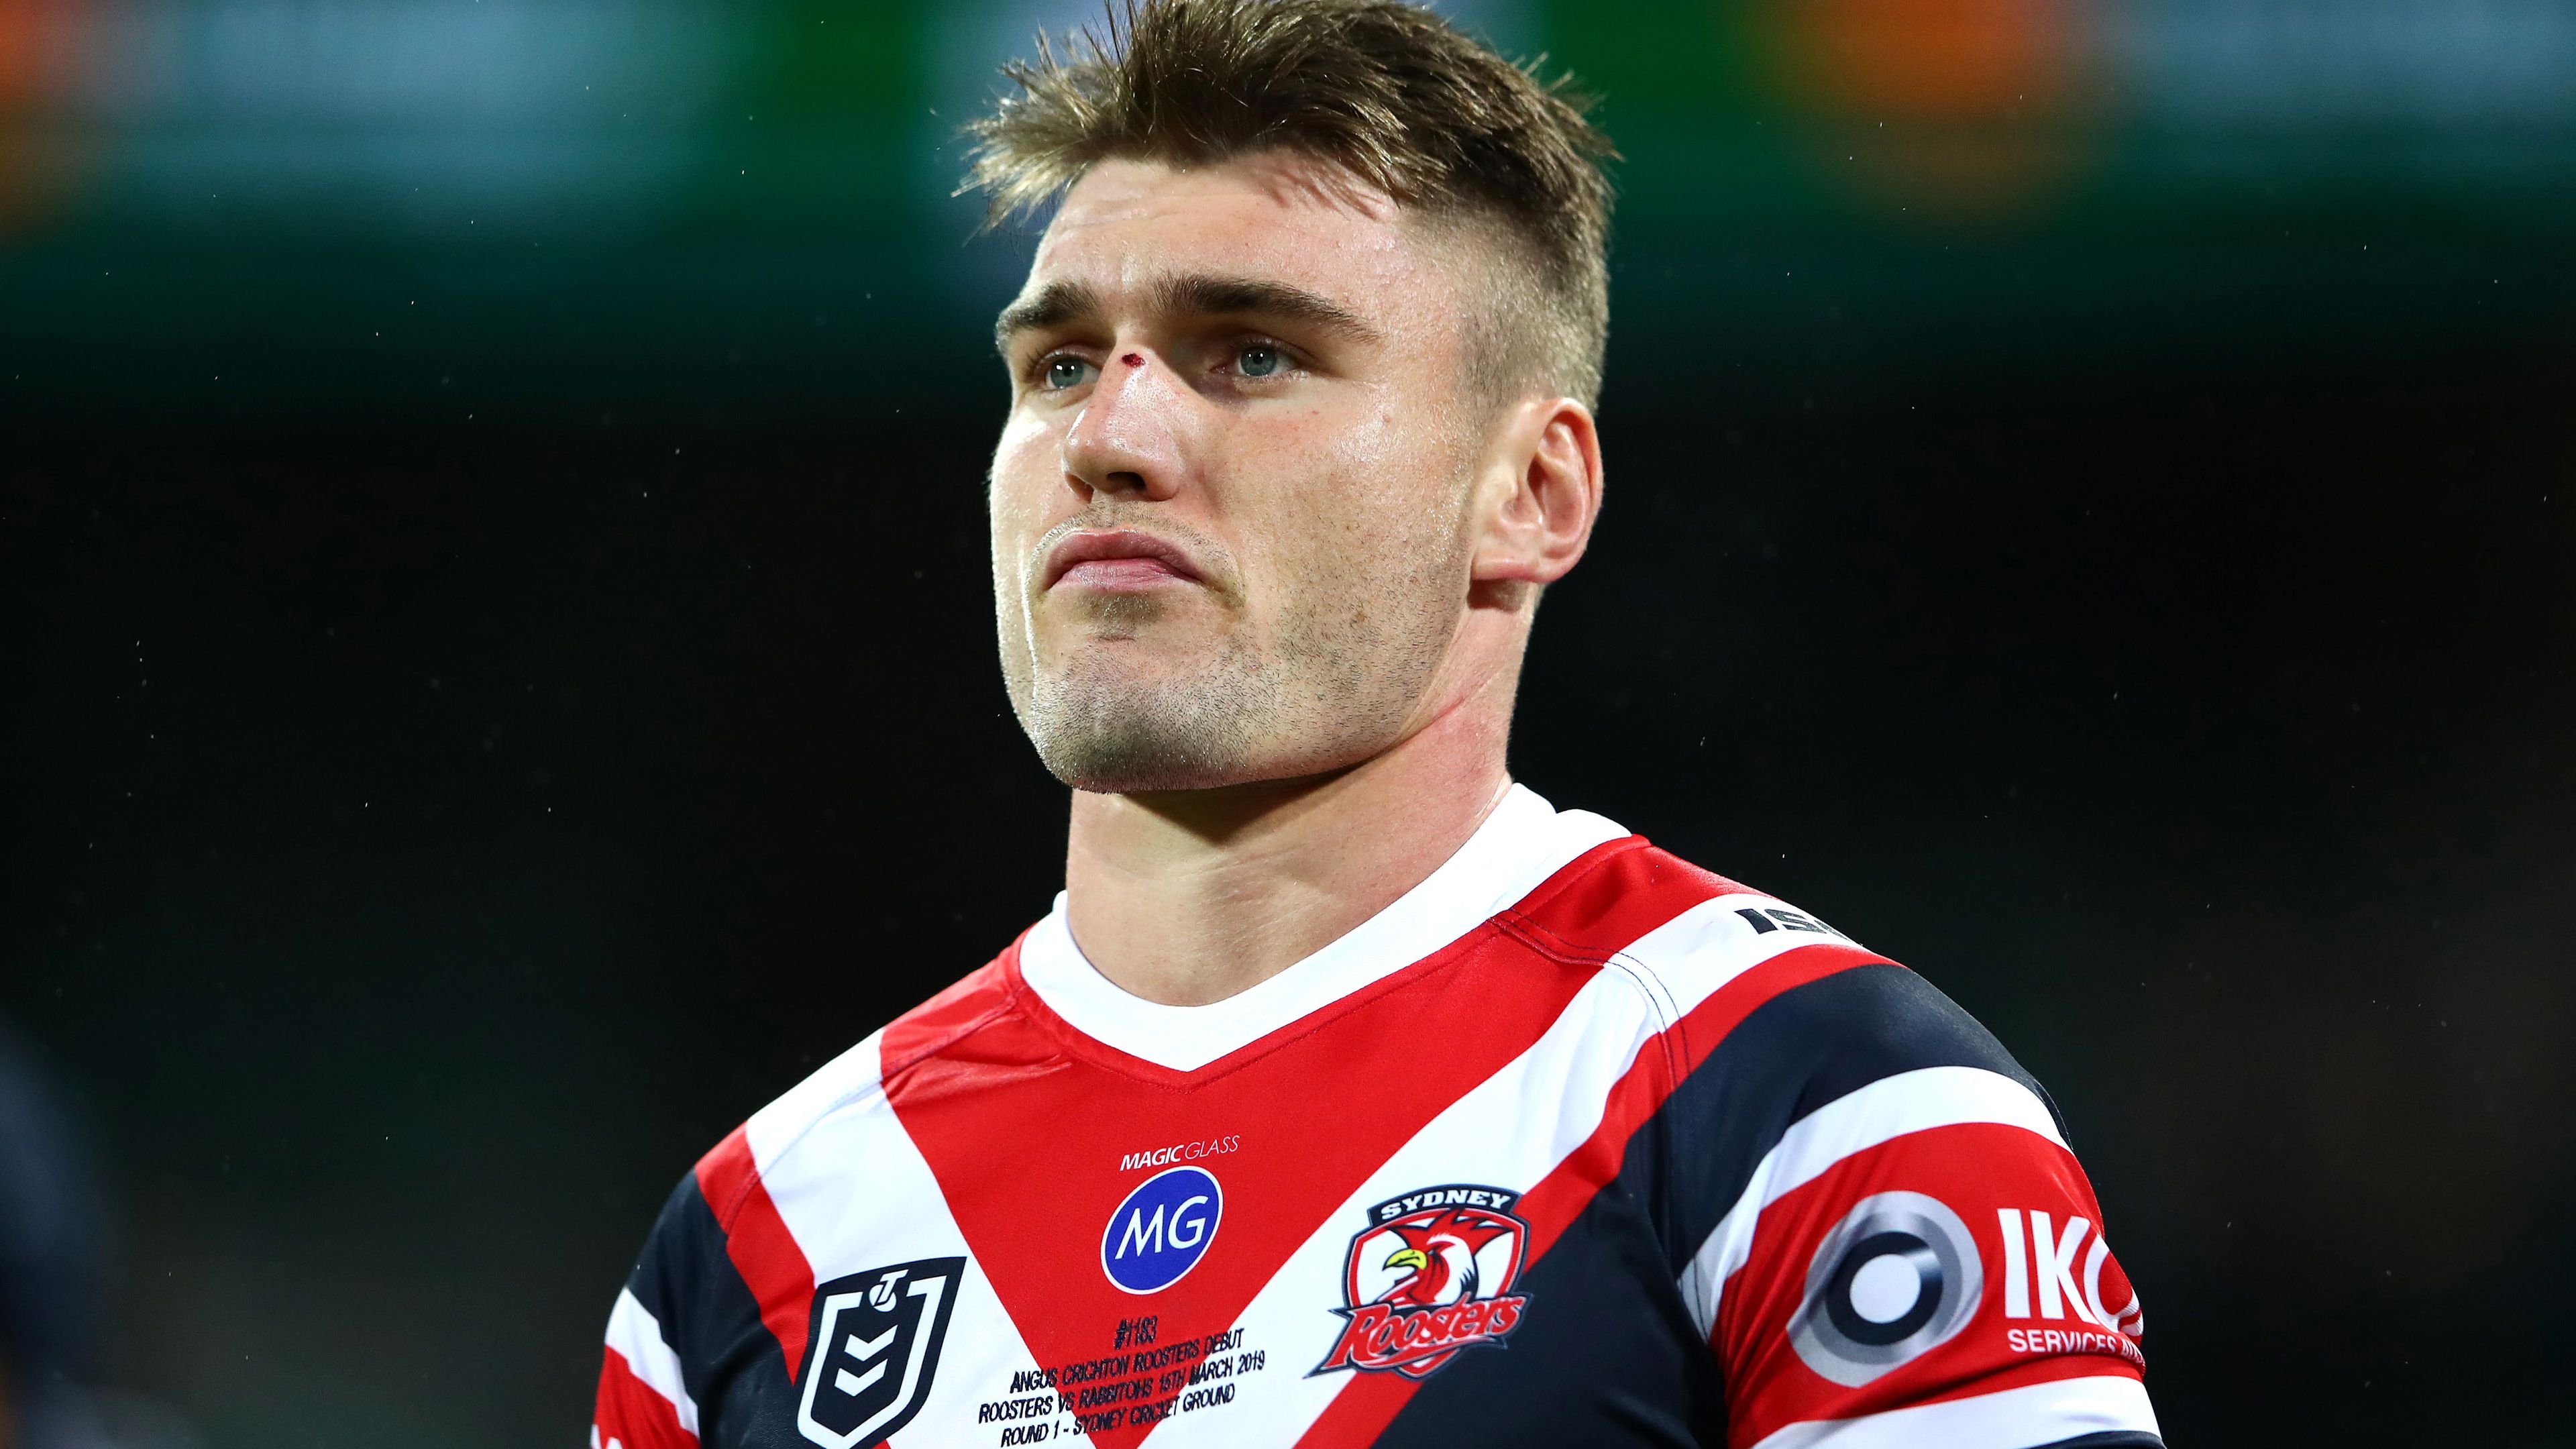 Sydney Roosters recruit Angus Crichton unfazed by 'traitor' sledge